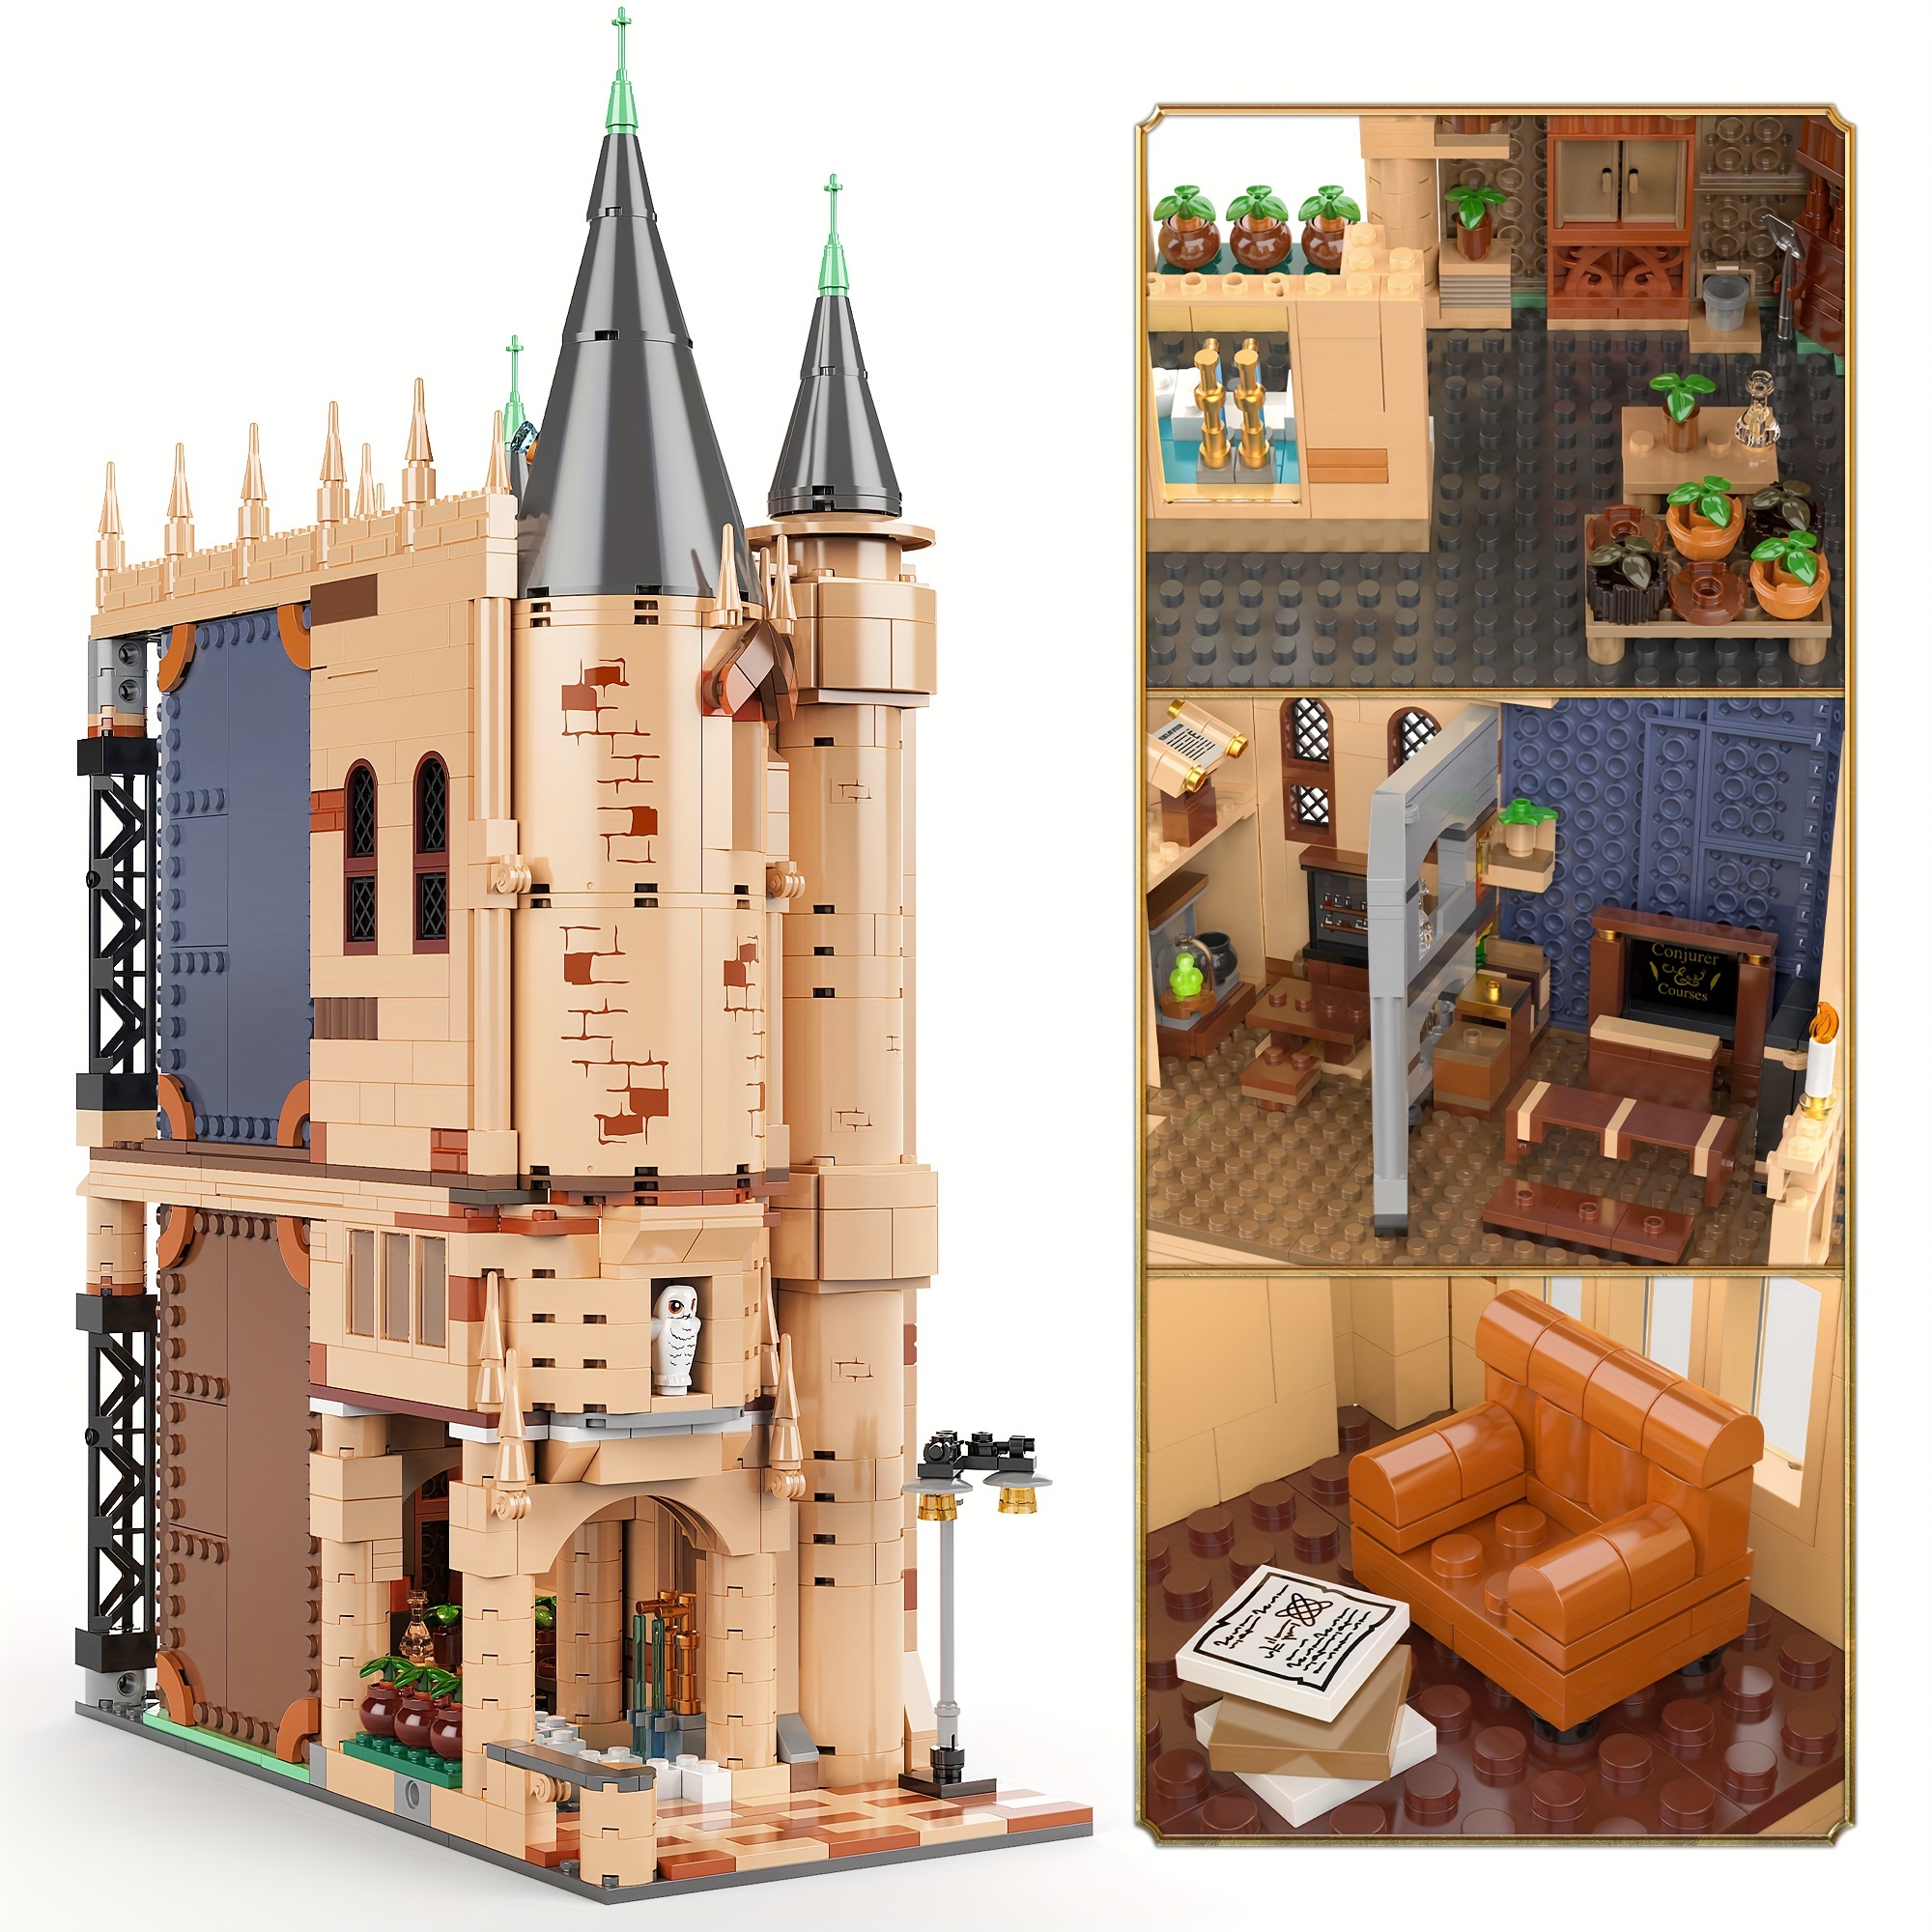 

Astronomy Building Set, Castle Building Toys (1107 Pcs) Build And Play For Boys Girls 8 9 10 11 12 13 14 Year Old, Good Gift Ideas